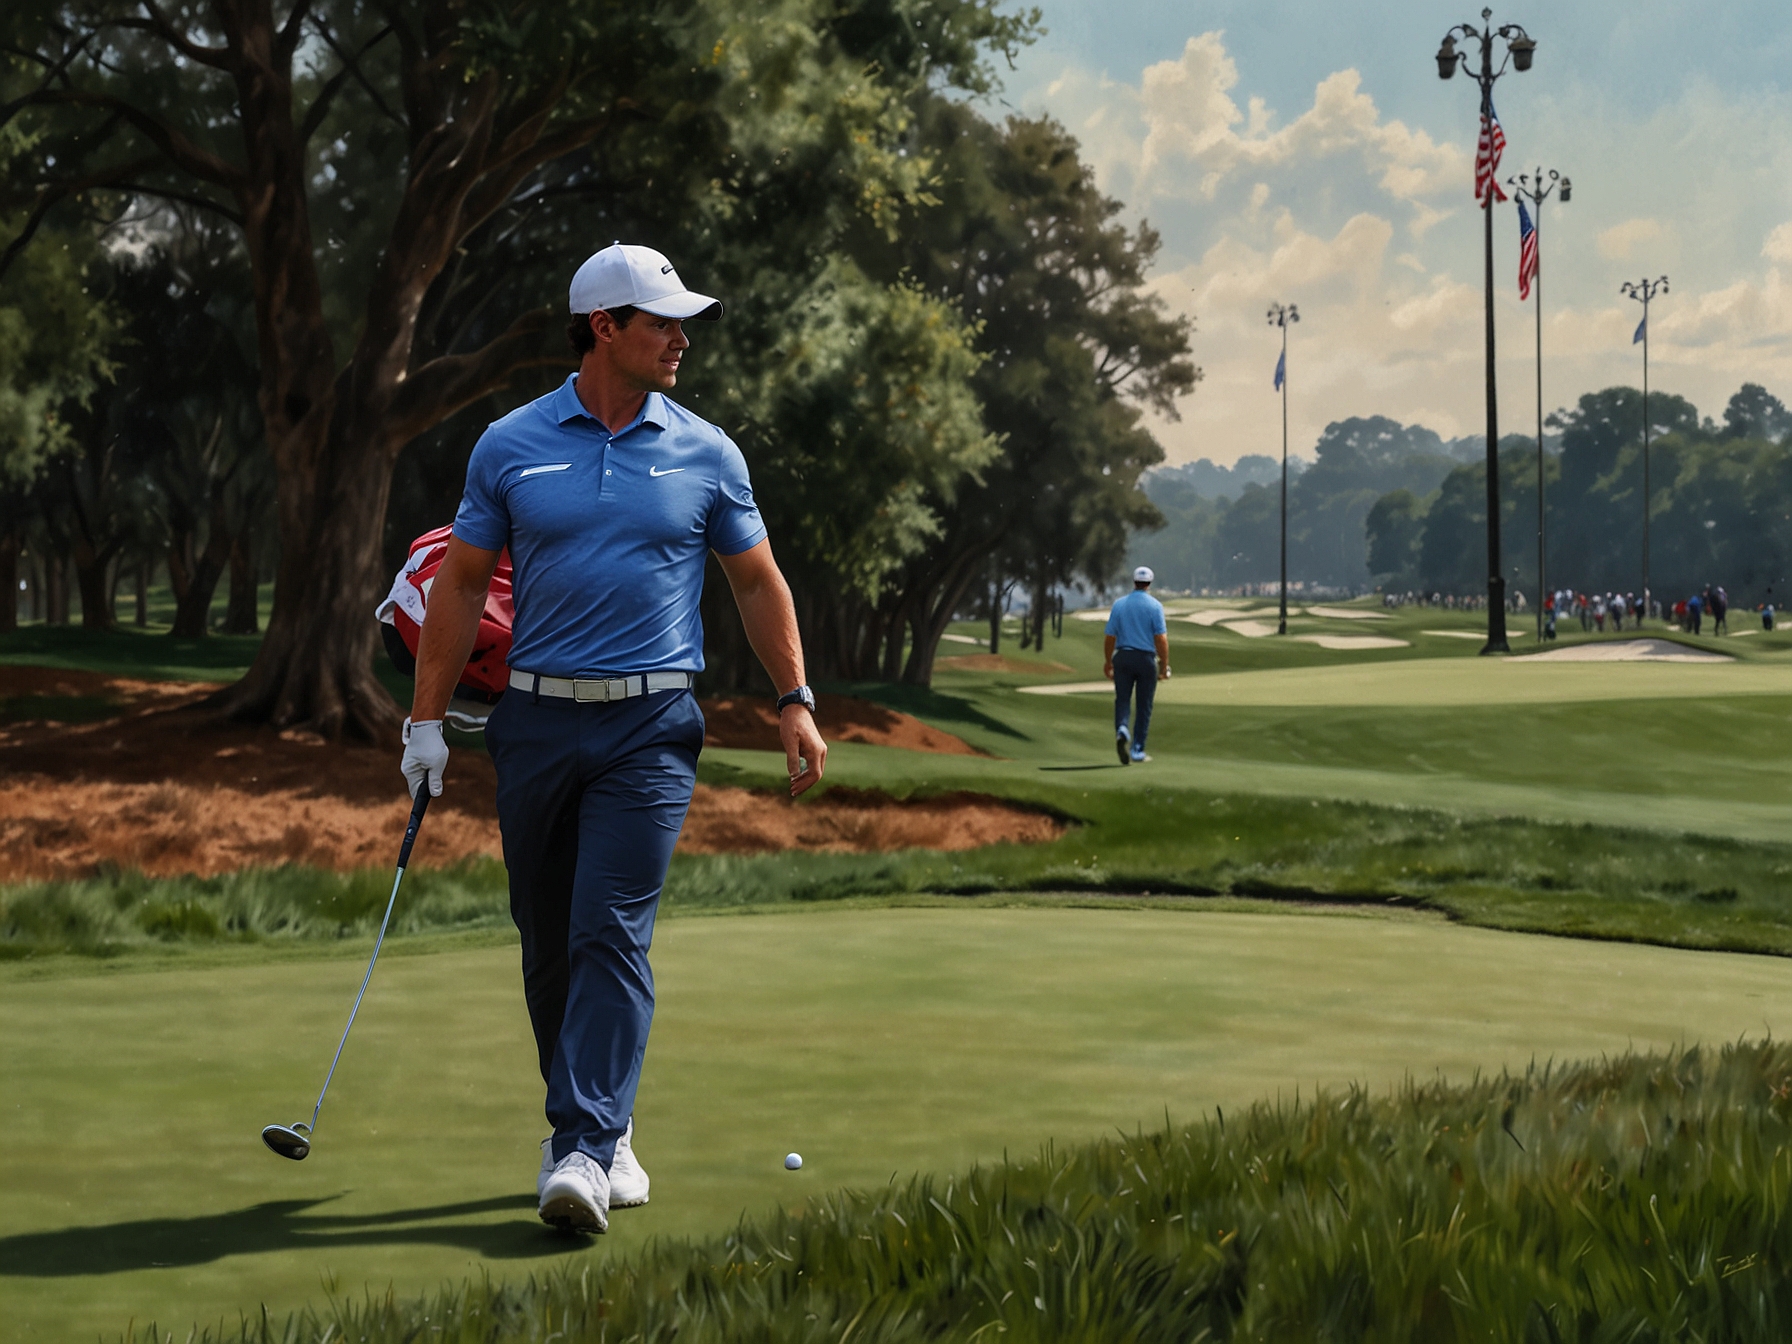 Rory McIlroy and Bryson DeChambeau walking together on the fairway during the U.S. Open, illustrating the intense competition and sportsmanship between the two golf greats.